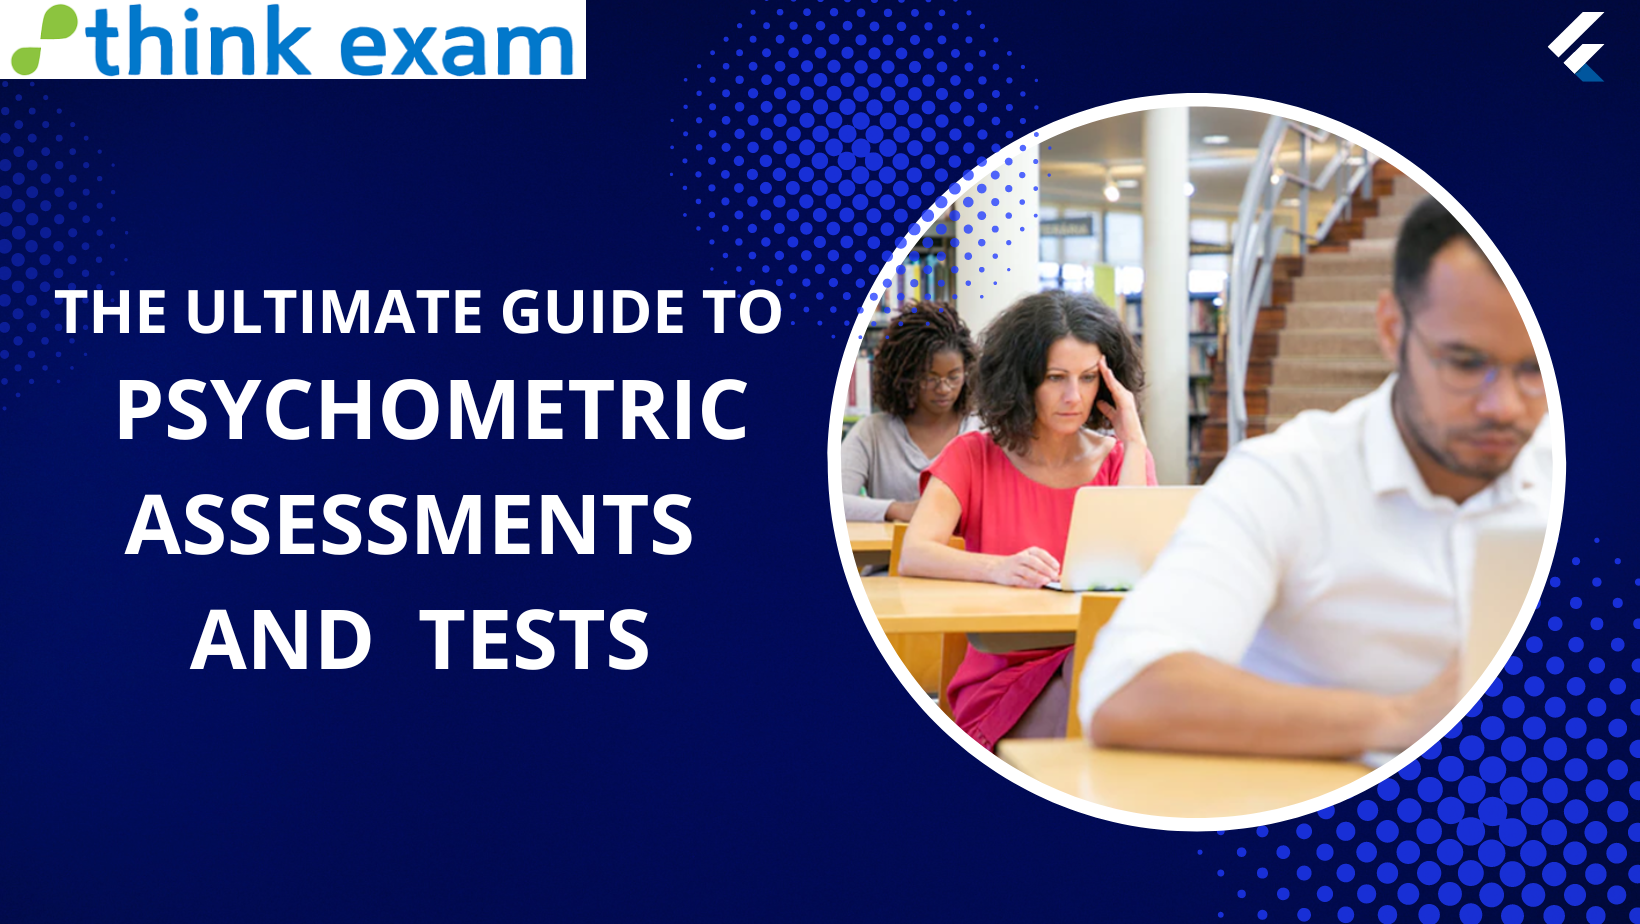 Image-The-Ultimate-Guide-to-Psychometric-Assessments-and-Tests.png